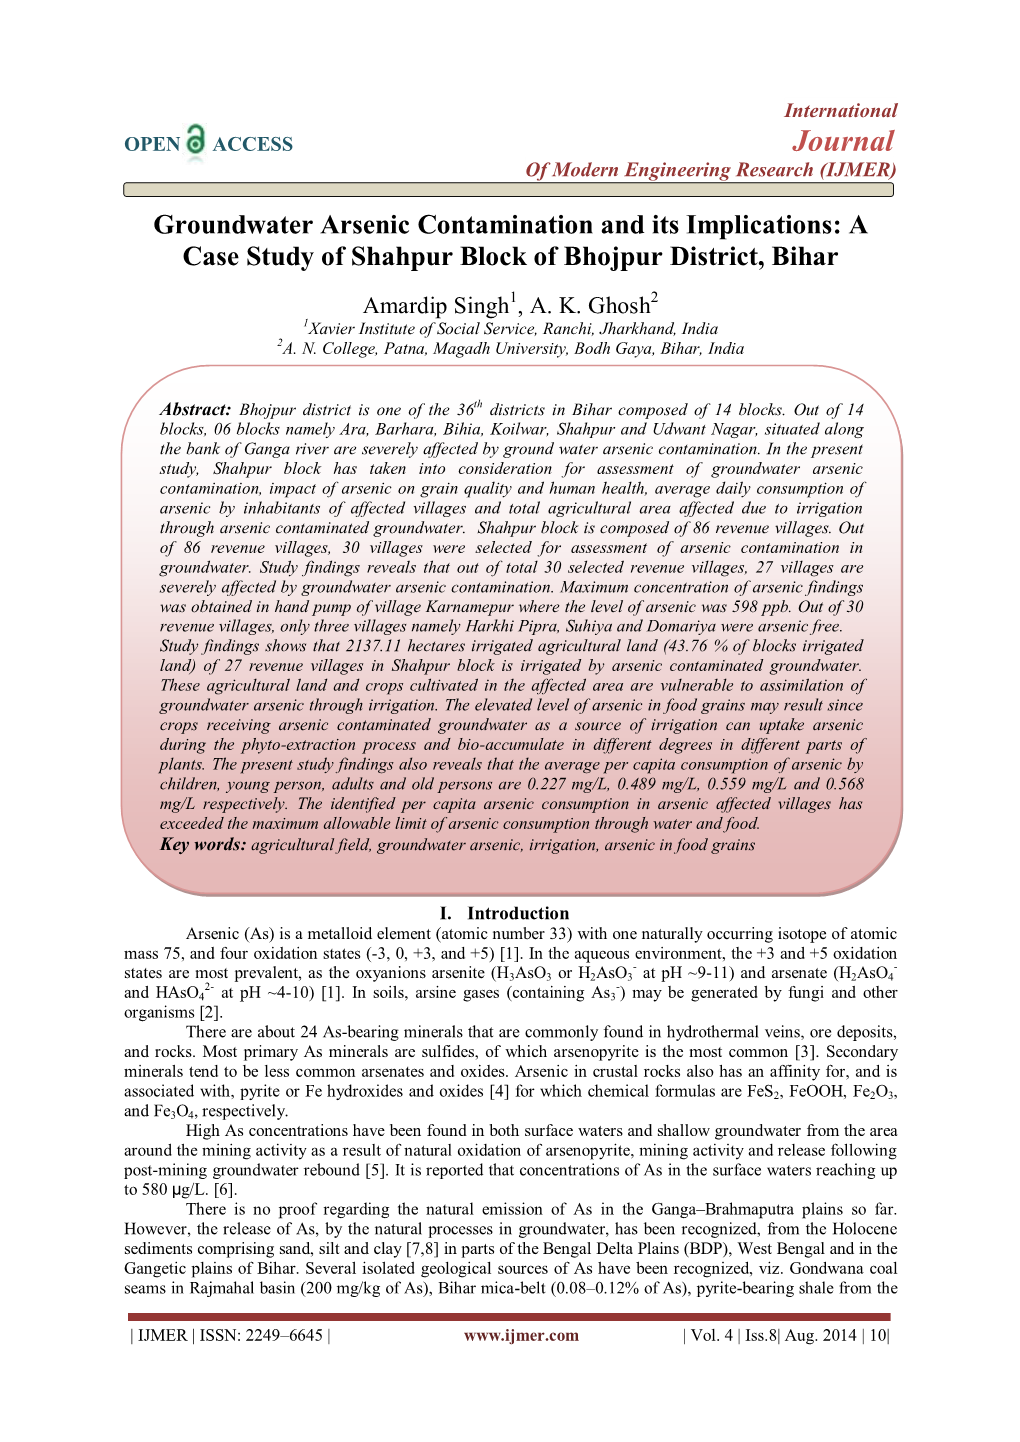 Groundwater Arsenic Contamination and Its Implications: a Case Study of Shahpur Block of Bhojpur District, Bihar